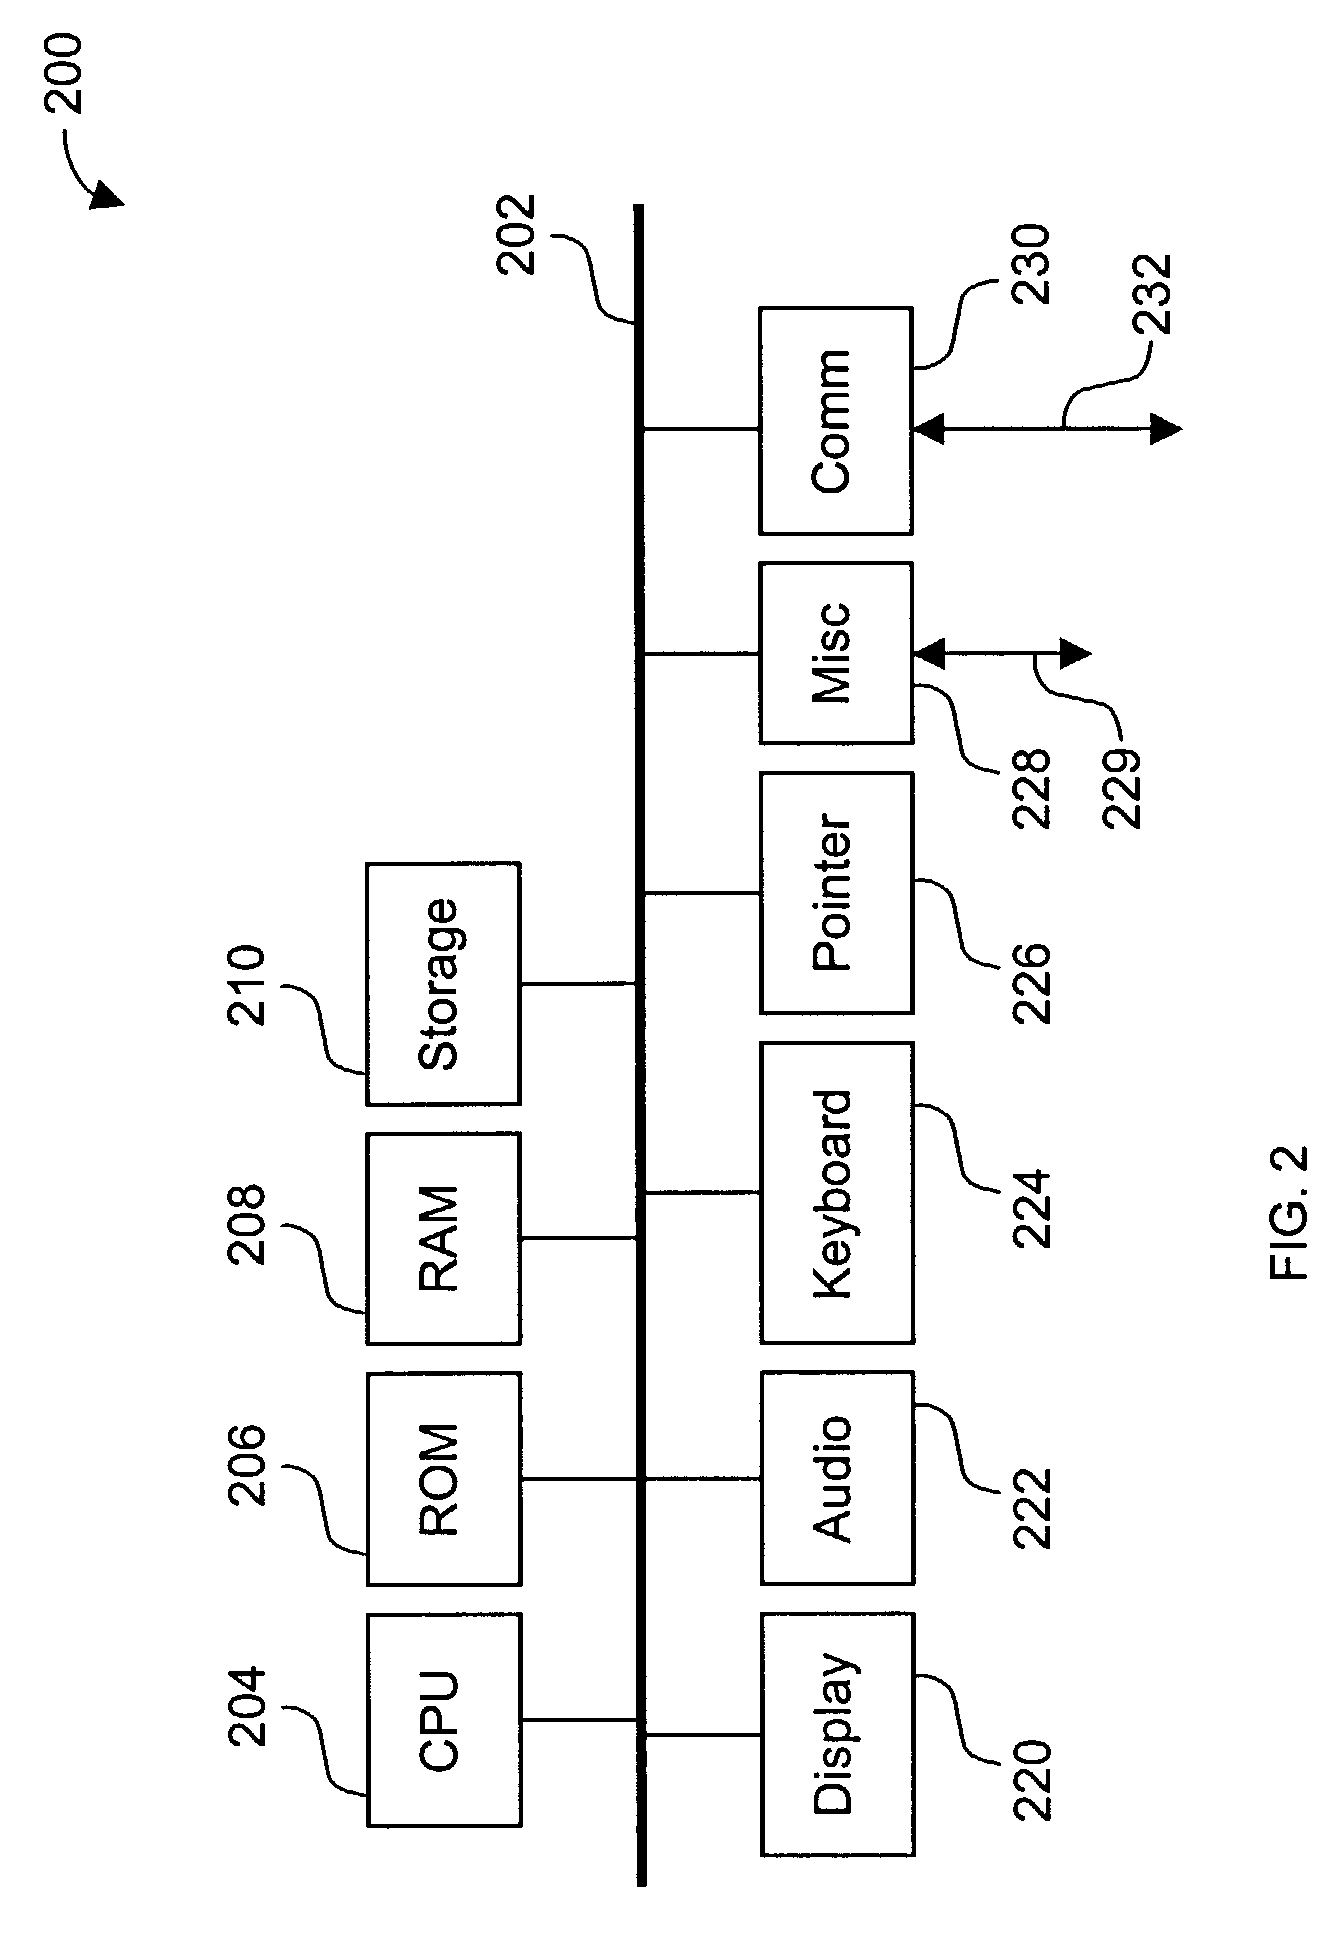 Method and apparatus for a client connection manager